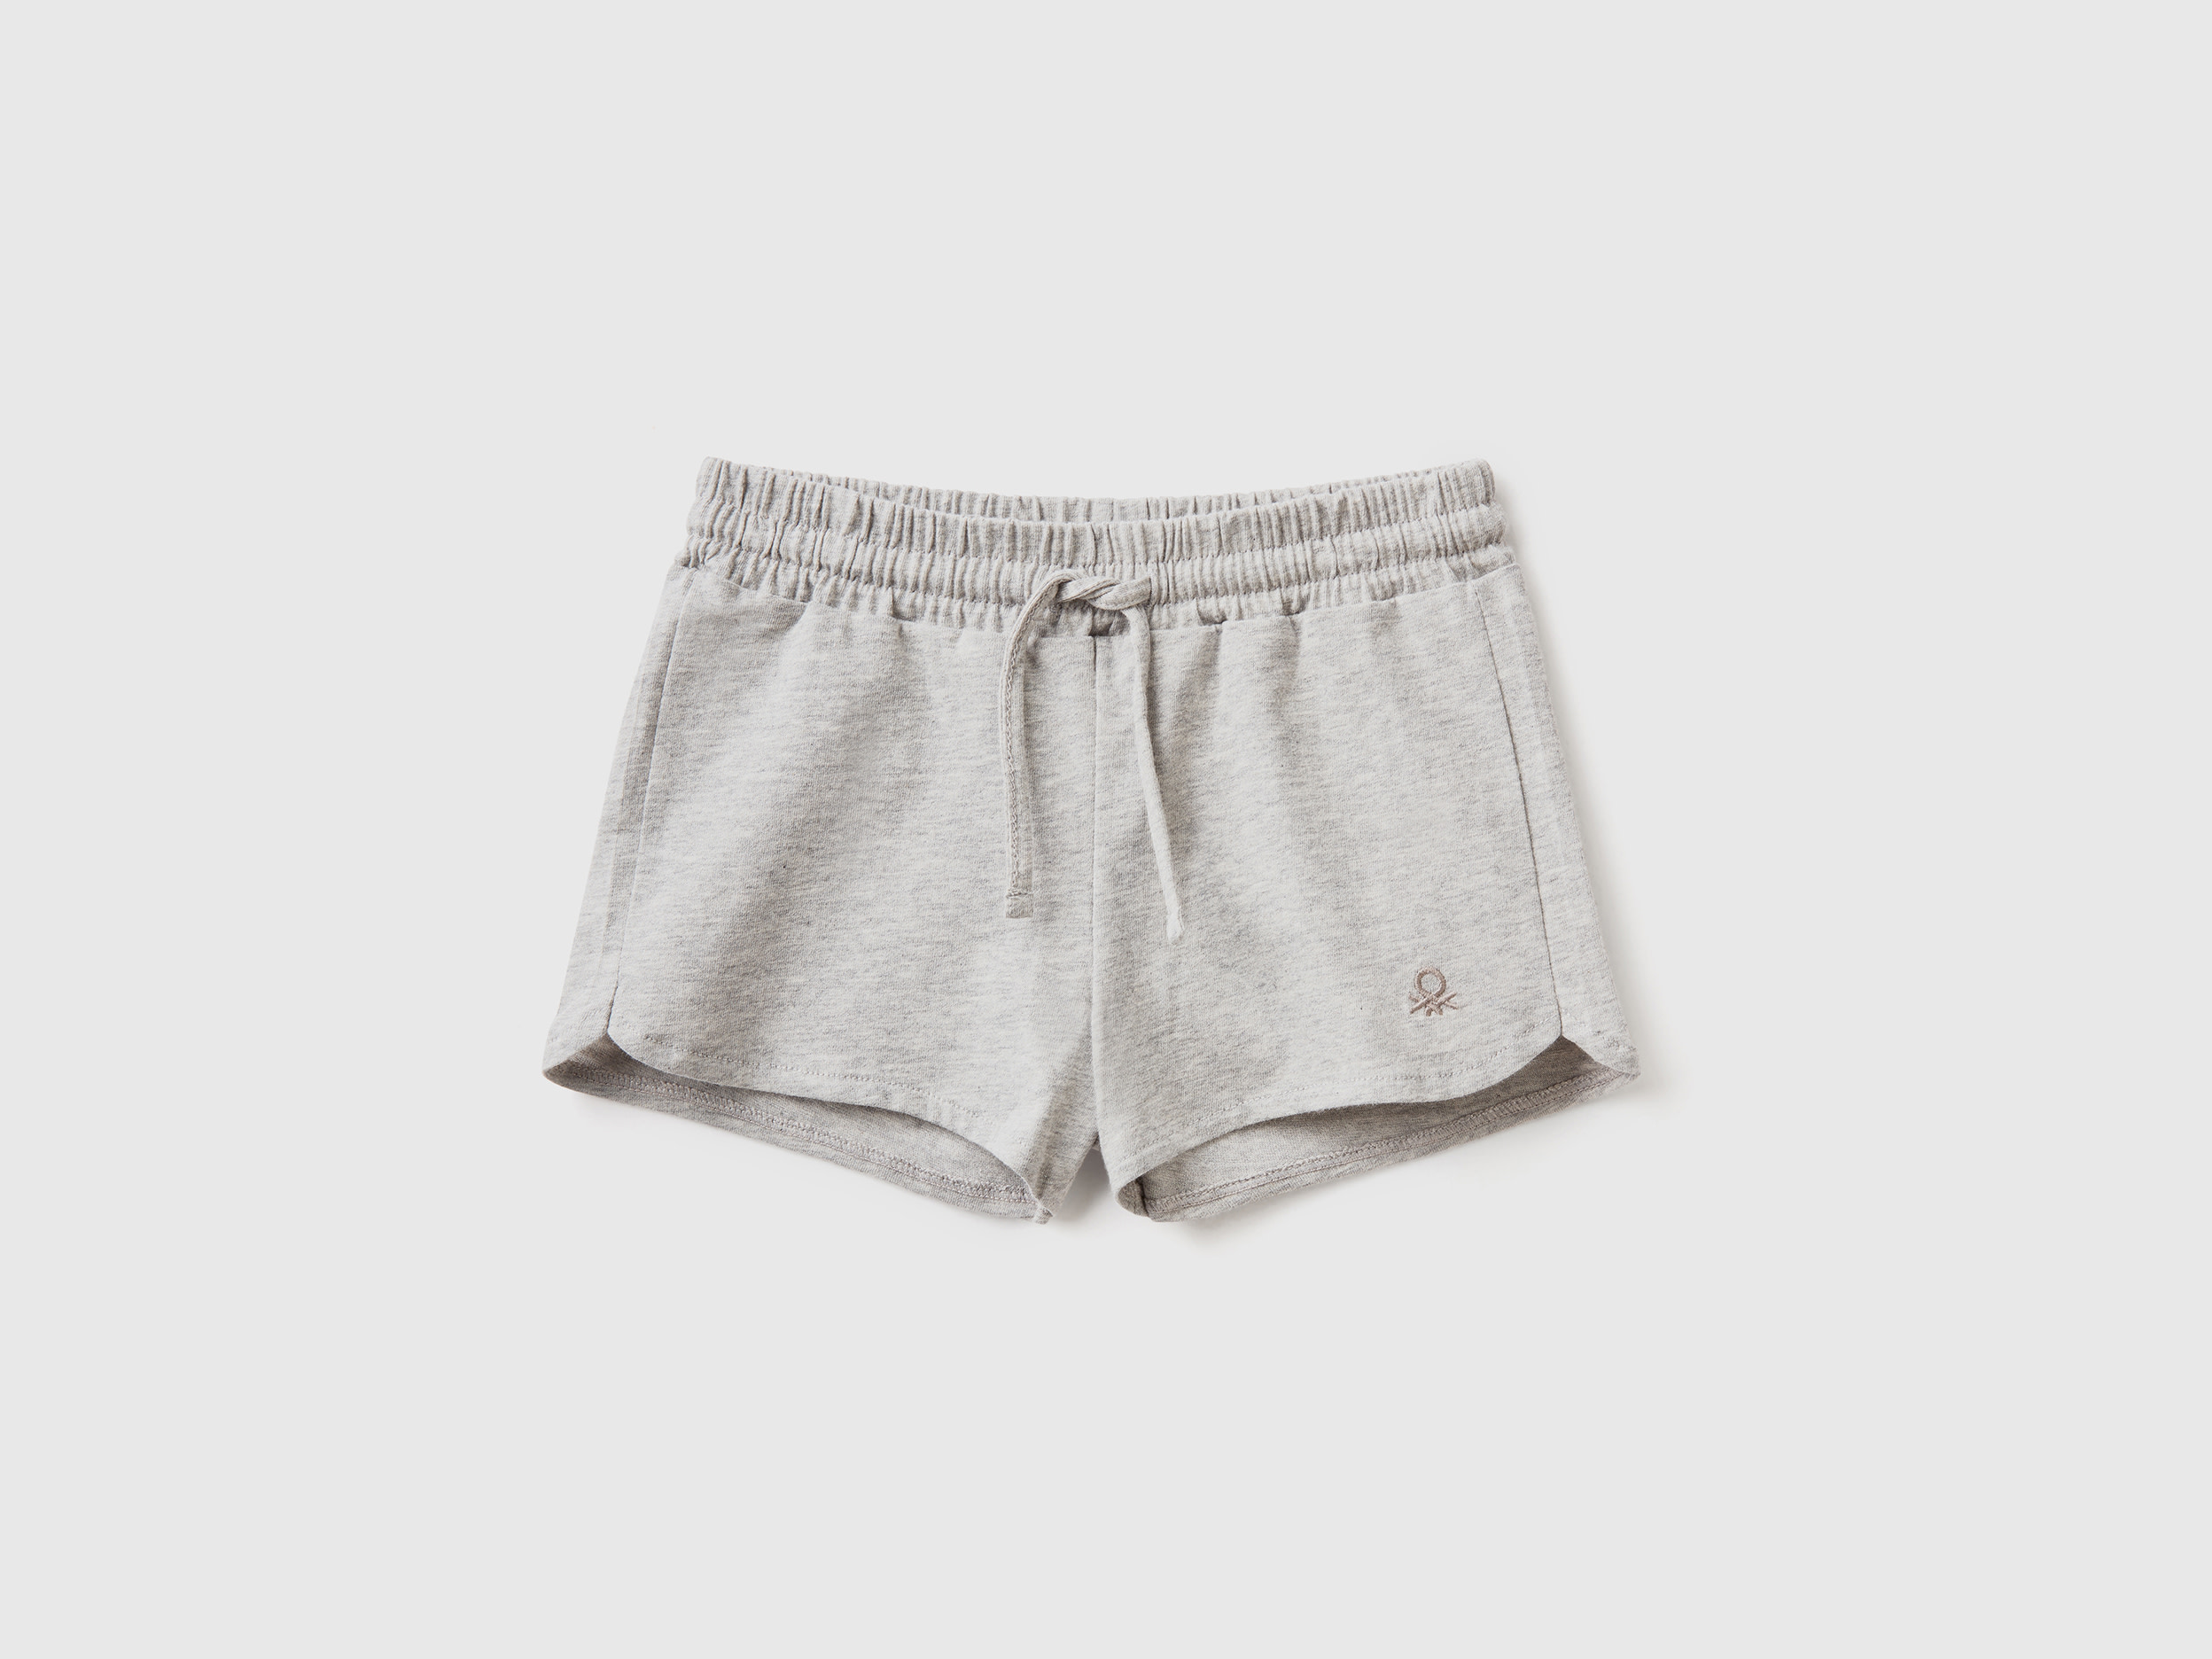 Benetton, Shorts With Drawstring In Organic Cotton, size 3-4, Light Gray, Kids